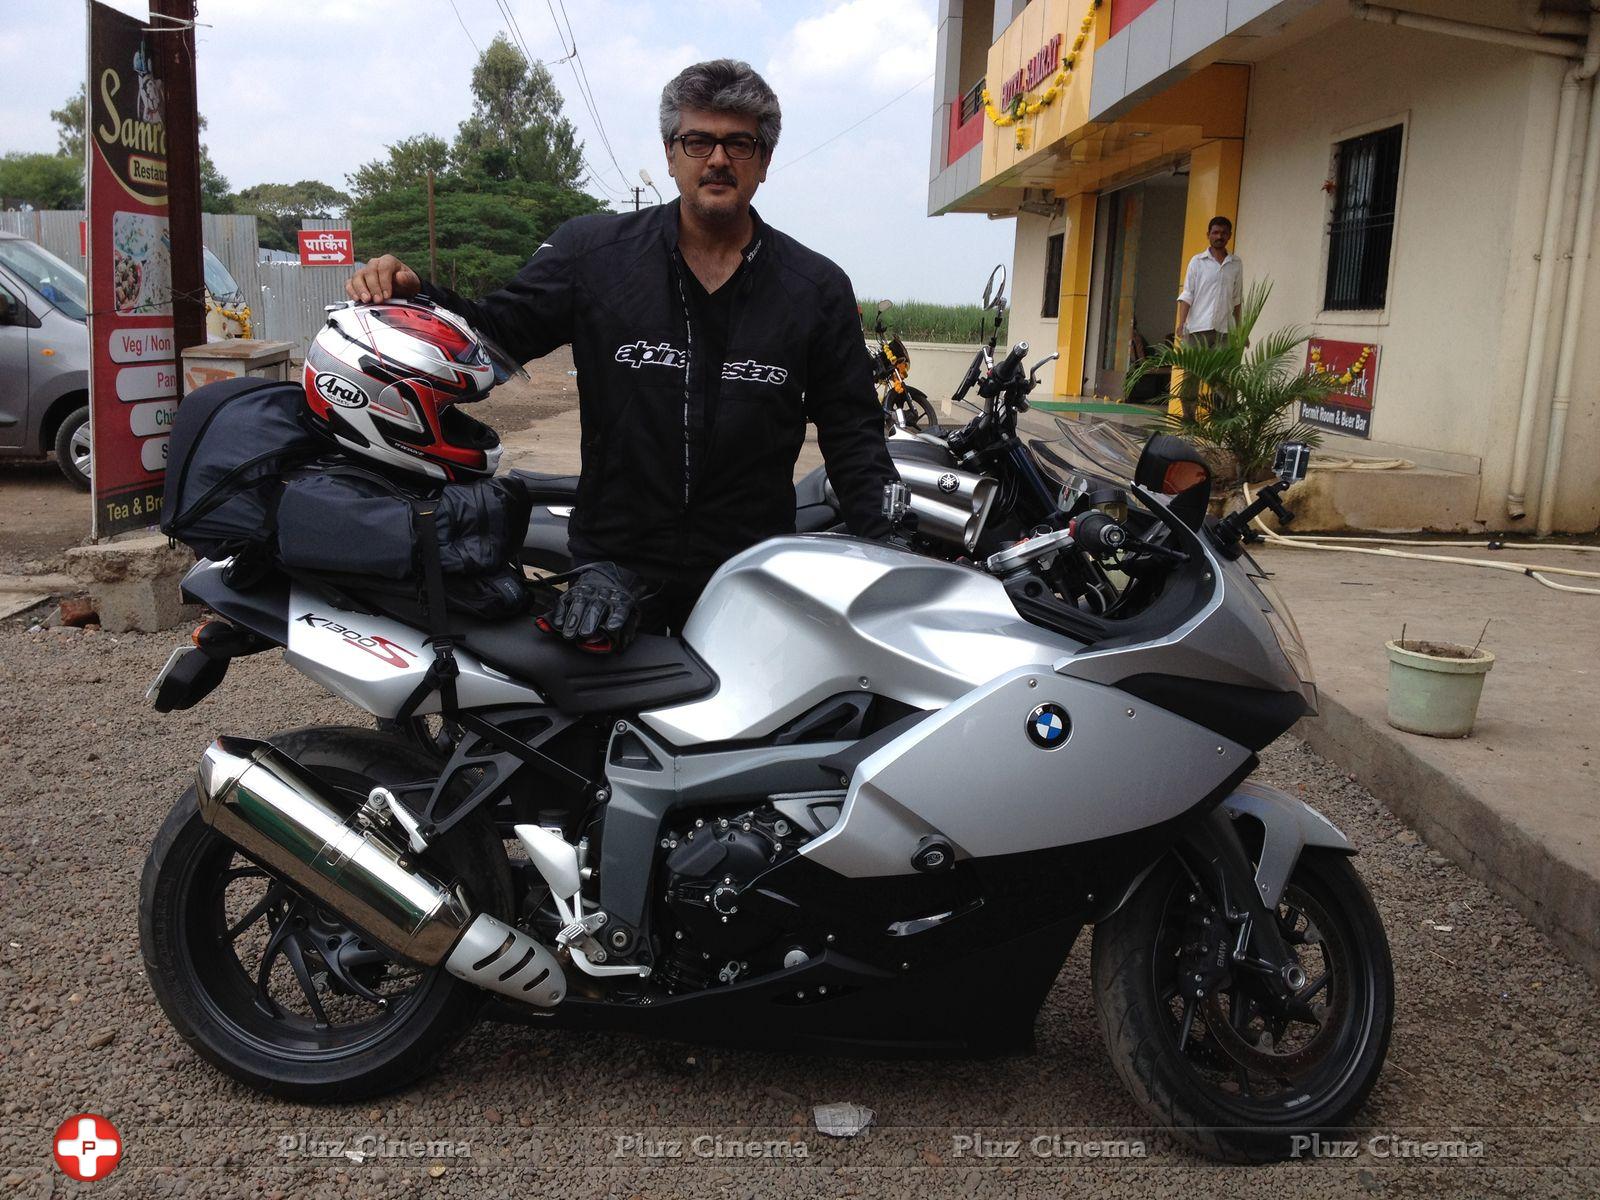 Ajith Kumar trip from Pune to Chennai in BMW K 1300 S bike Photos | Picture 607732